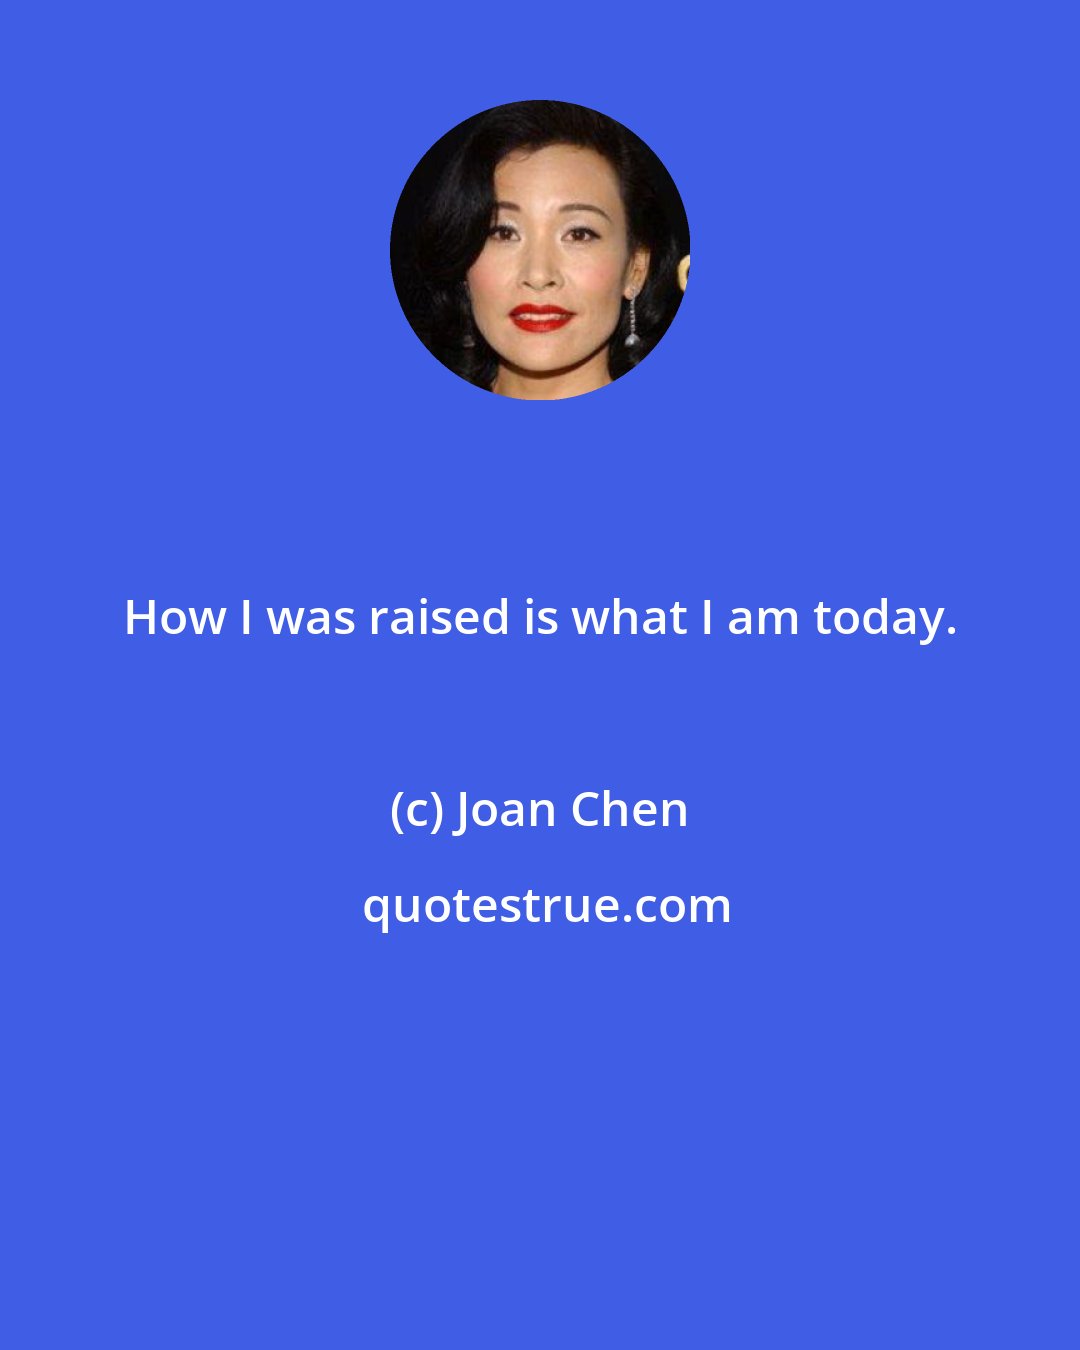 Joan Chen: How I was raised is what I am today.